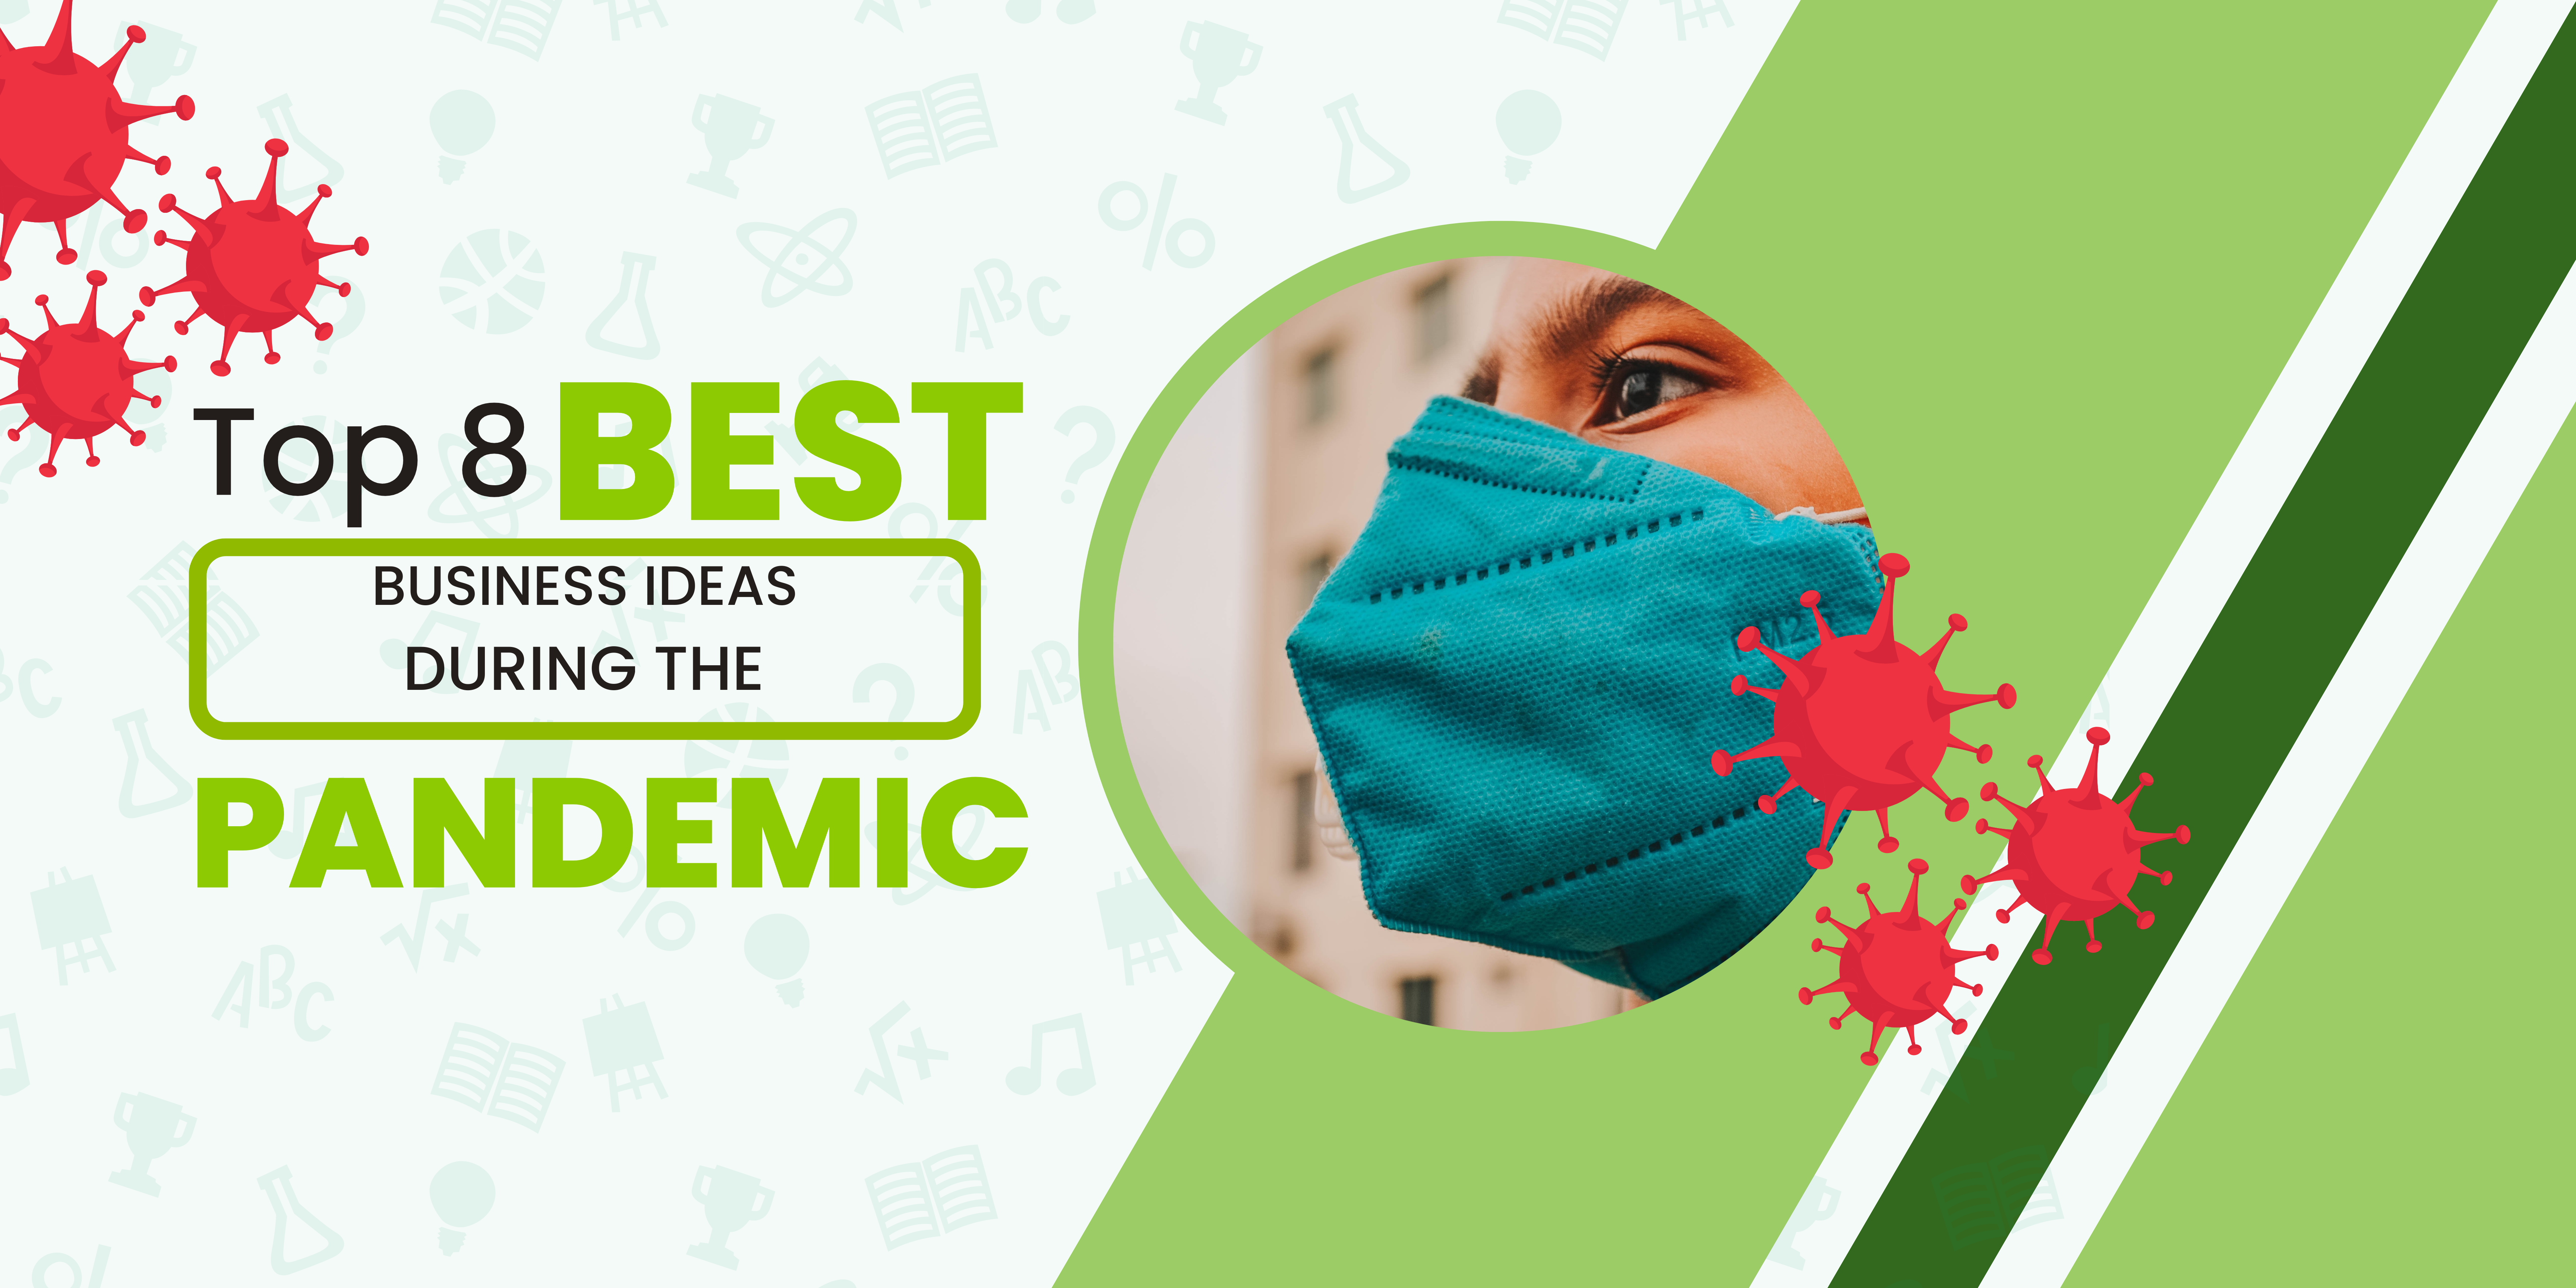 Top 8 Best Business Ideas During the Pandemic BANNER -diarynigracia